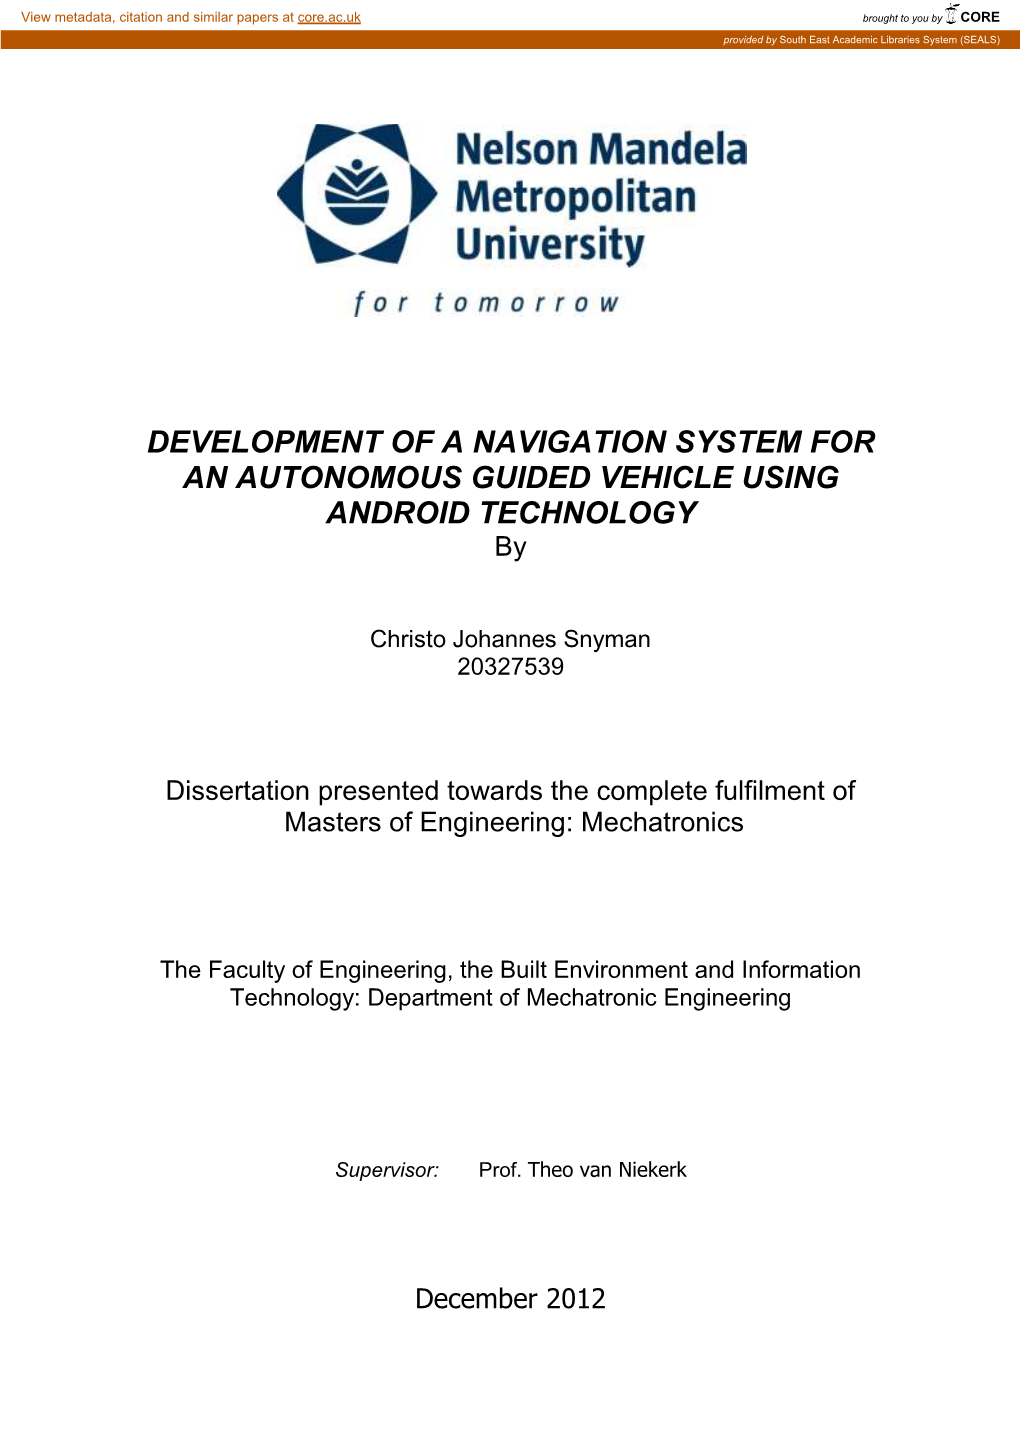 DEVELOPMENT of a NAVIGATION SYSTEM for an AUTONOMOUS GUIDED VEHICLE USING ANDROID TECHNOLOGY By